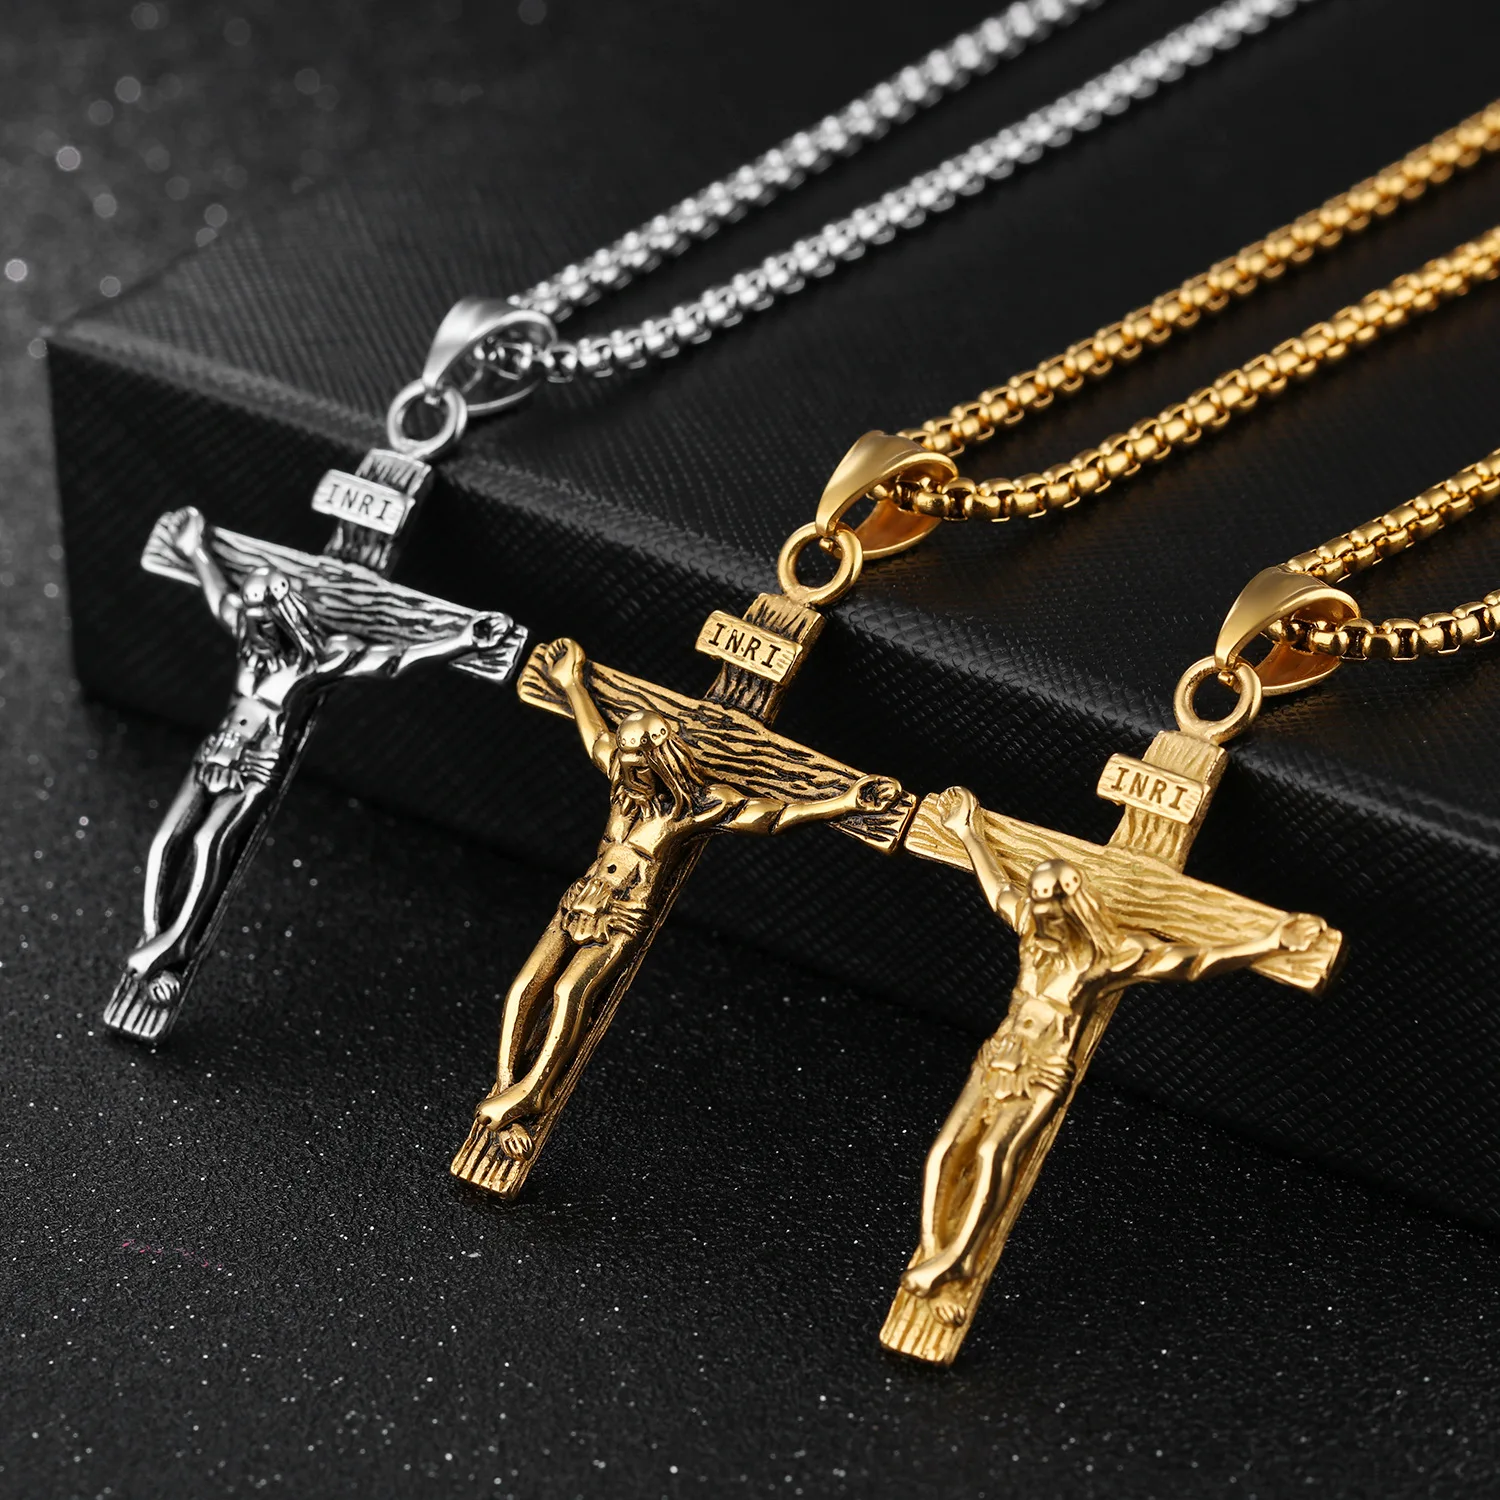 

Charming Gold Cross Chain Stainless steel Necklace Cool Accessory Fashion Jesus Cross Pendant Necklaces Gifts, Picture shows